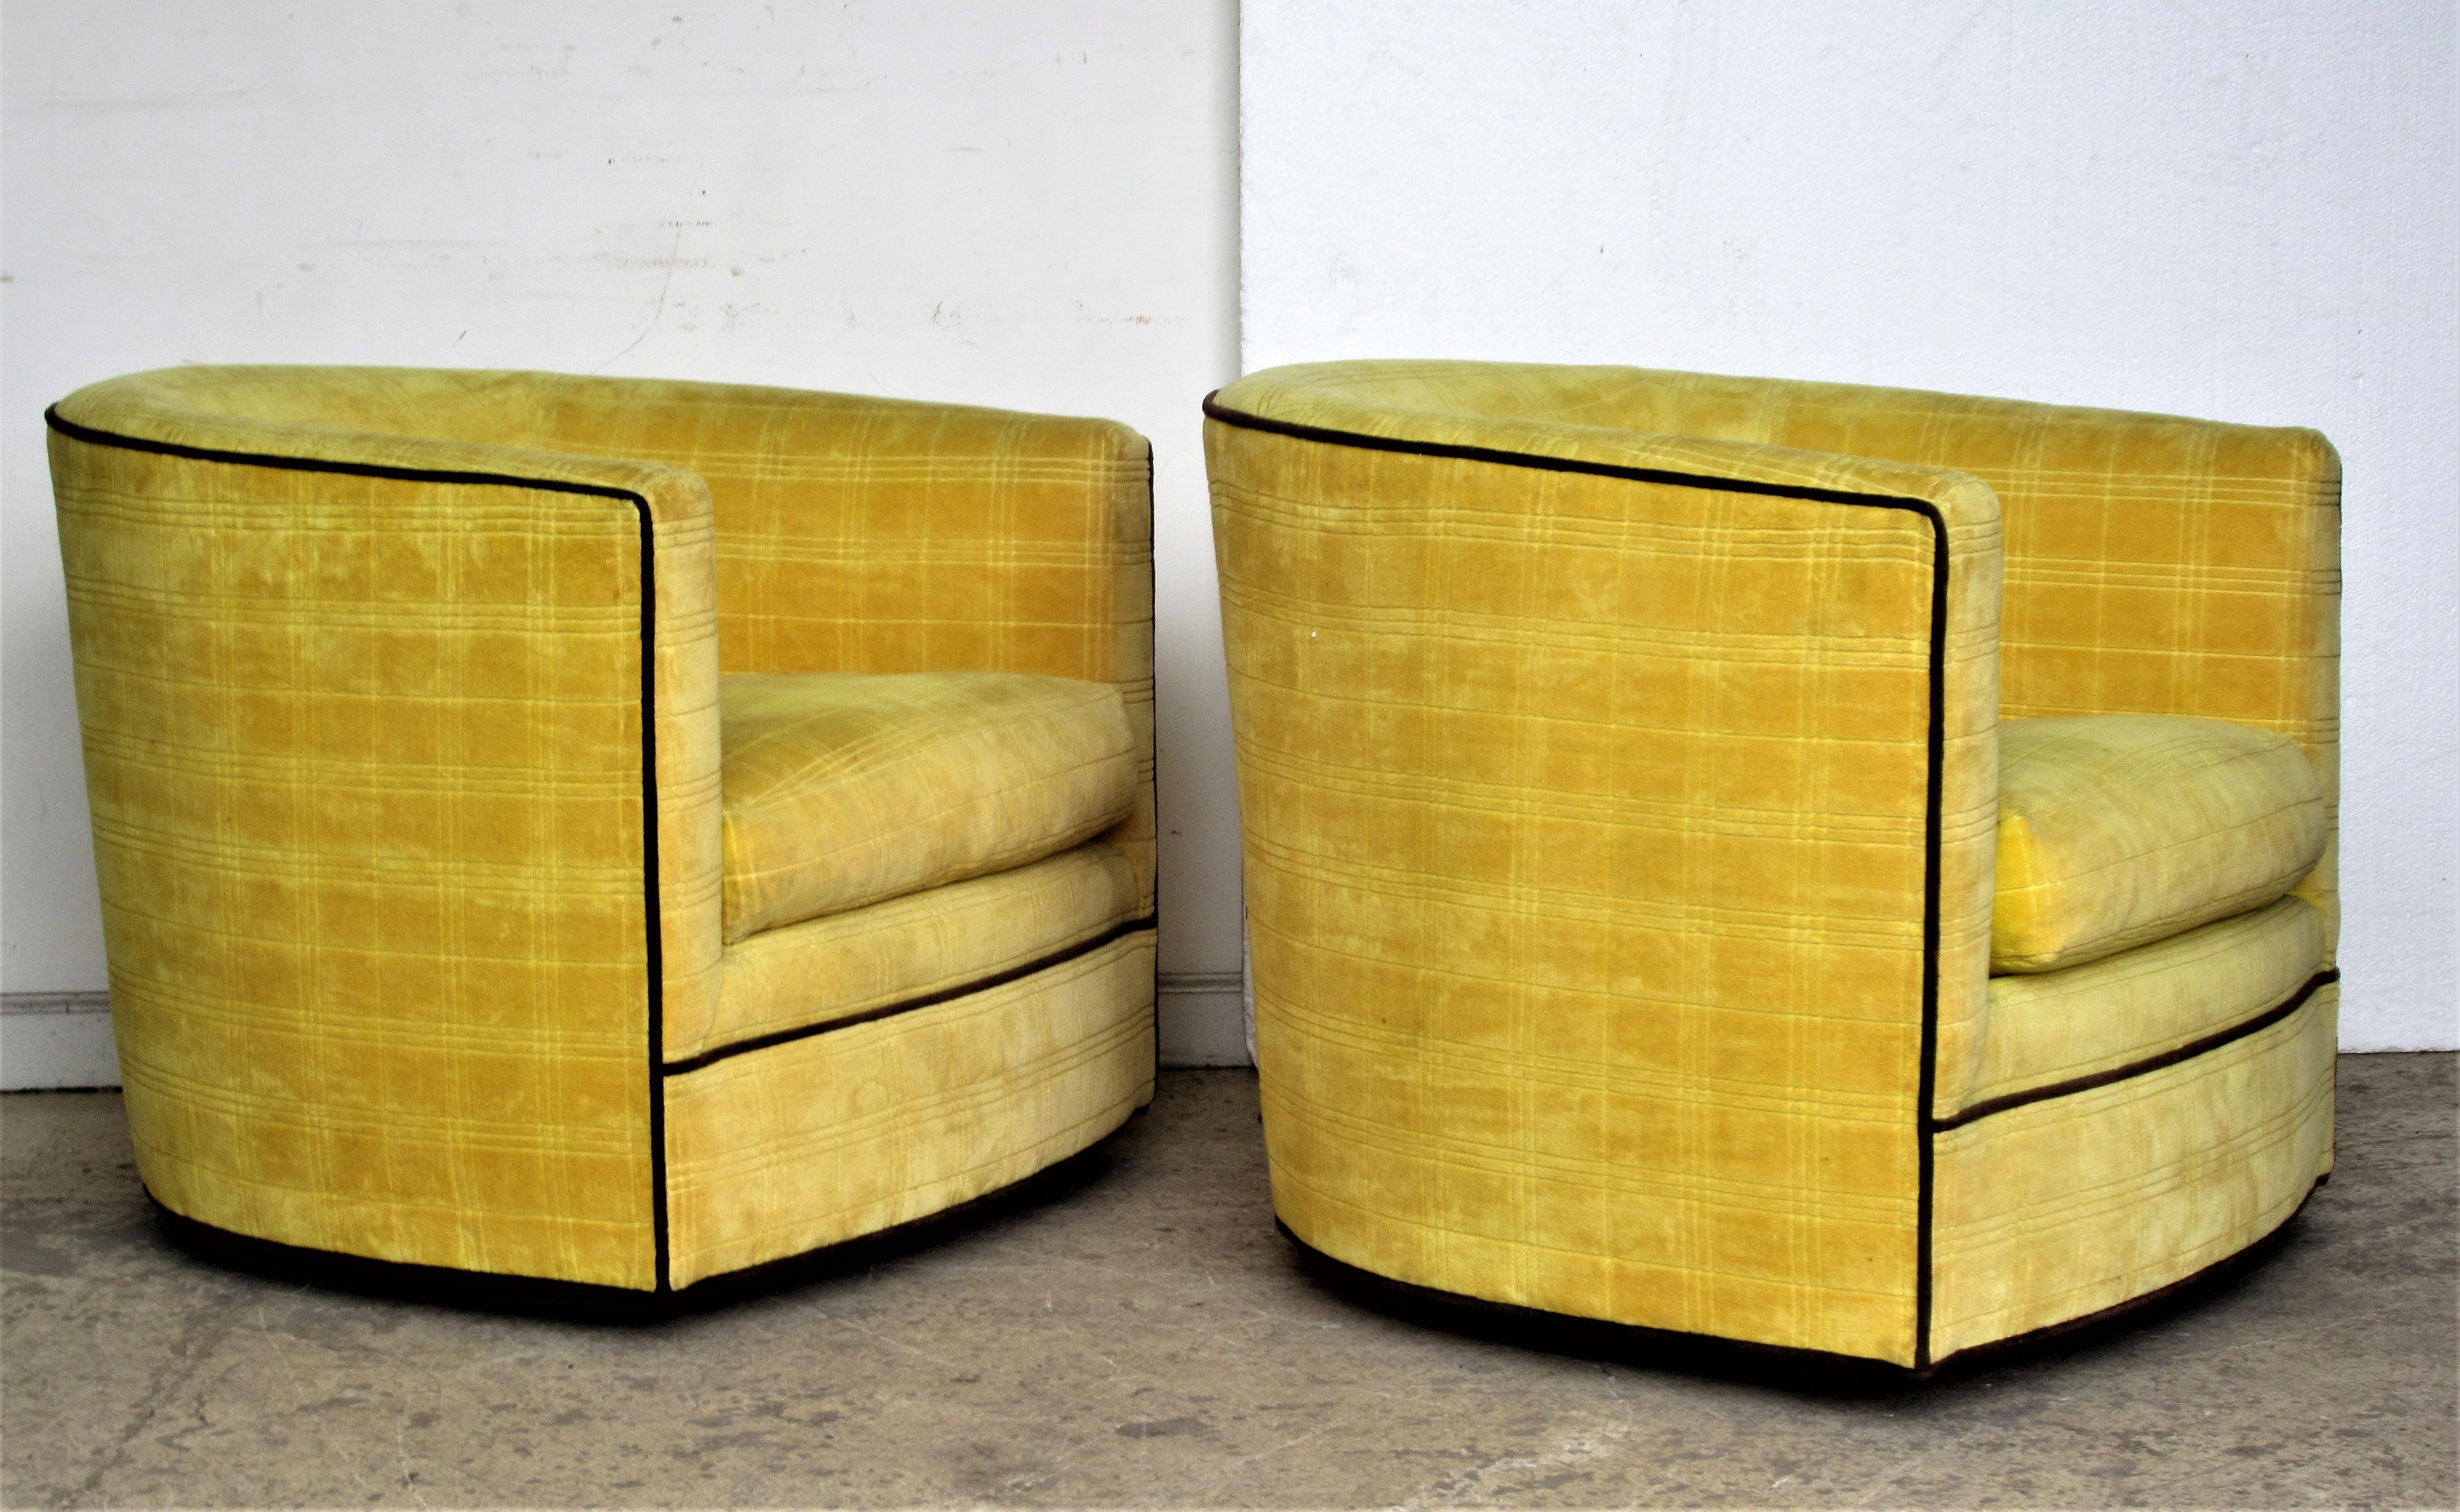 A very good looking pair of Milo Baughman style swivel barrel lounge chairs in the original patterned yellow cotton felt upholstery with dark brown raised piping, circa 1970s. Look at all pictures and read condition report in comment section.